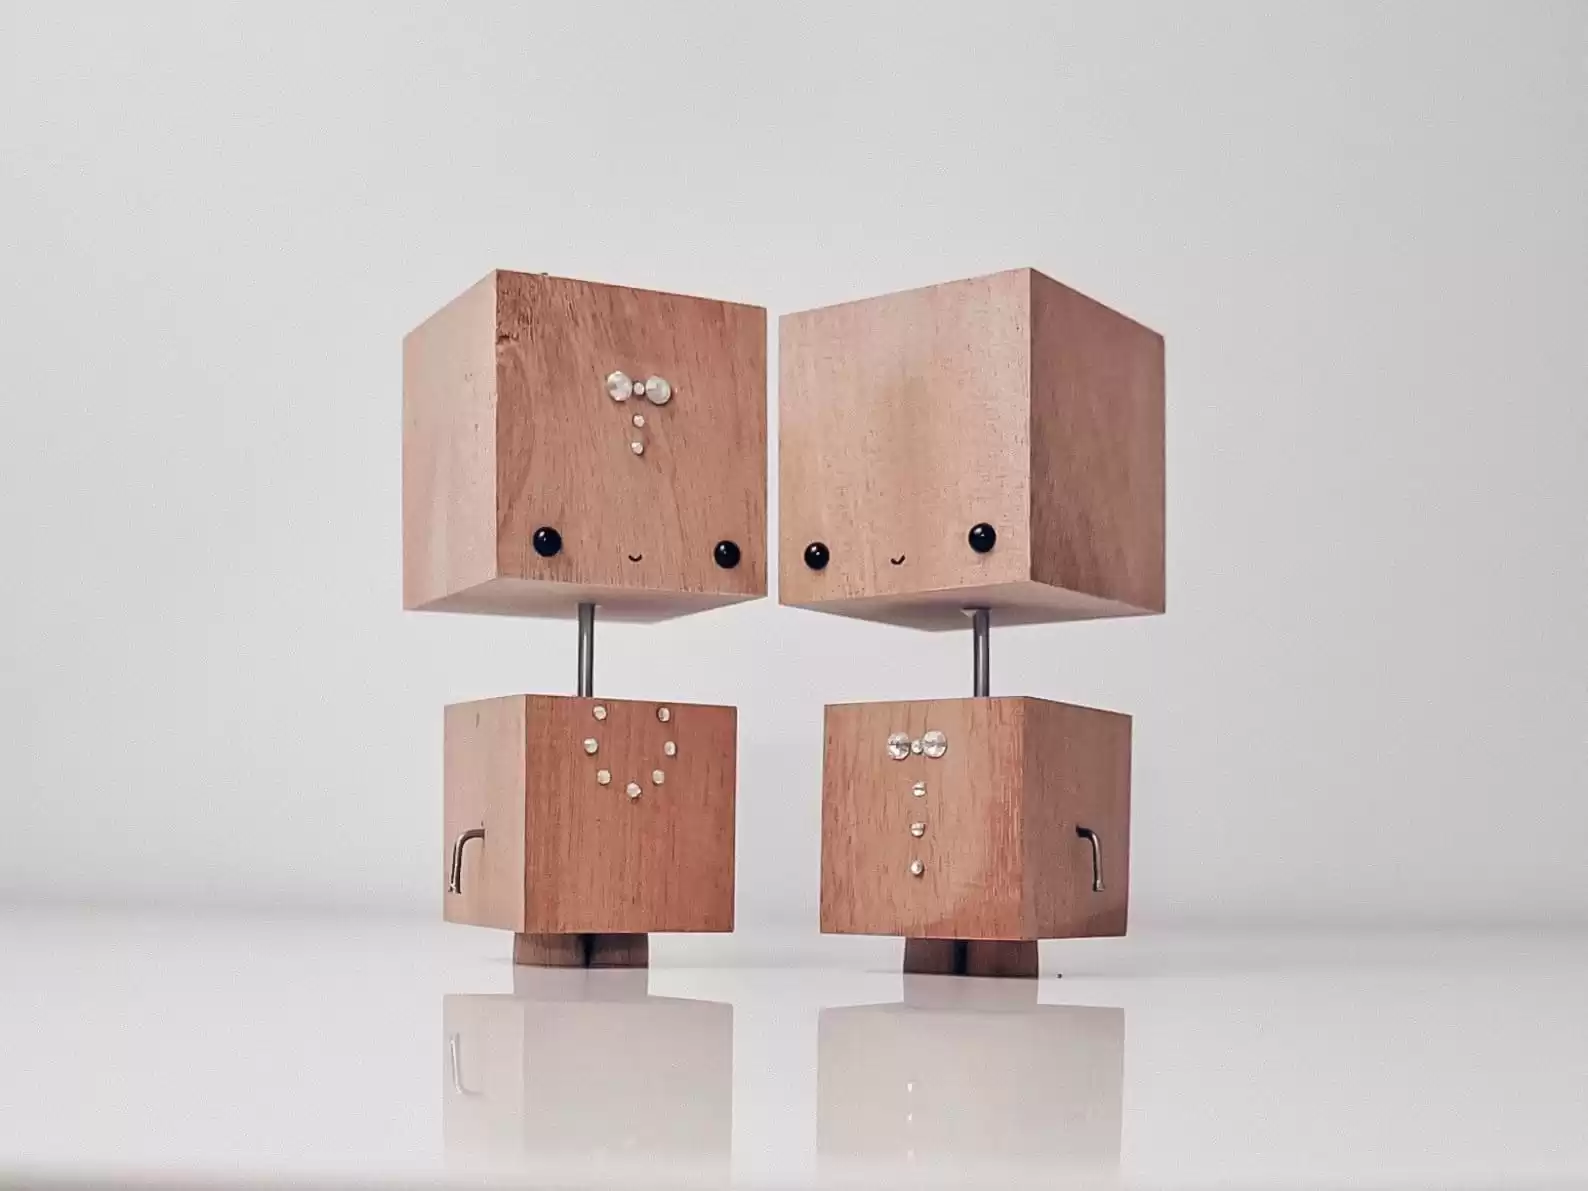 Wooden Couples Gift Pair of Robots